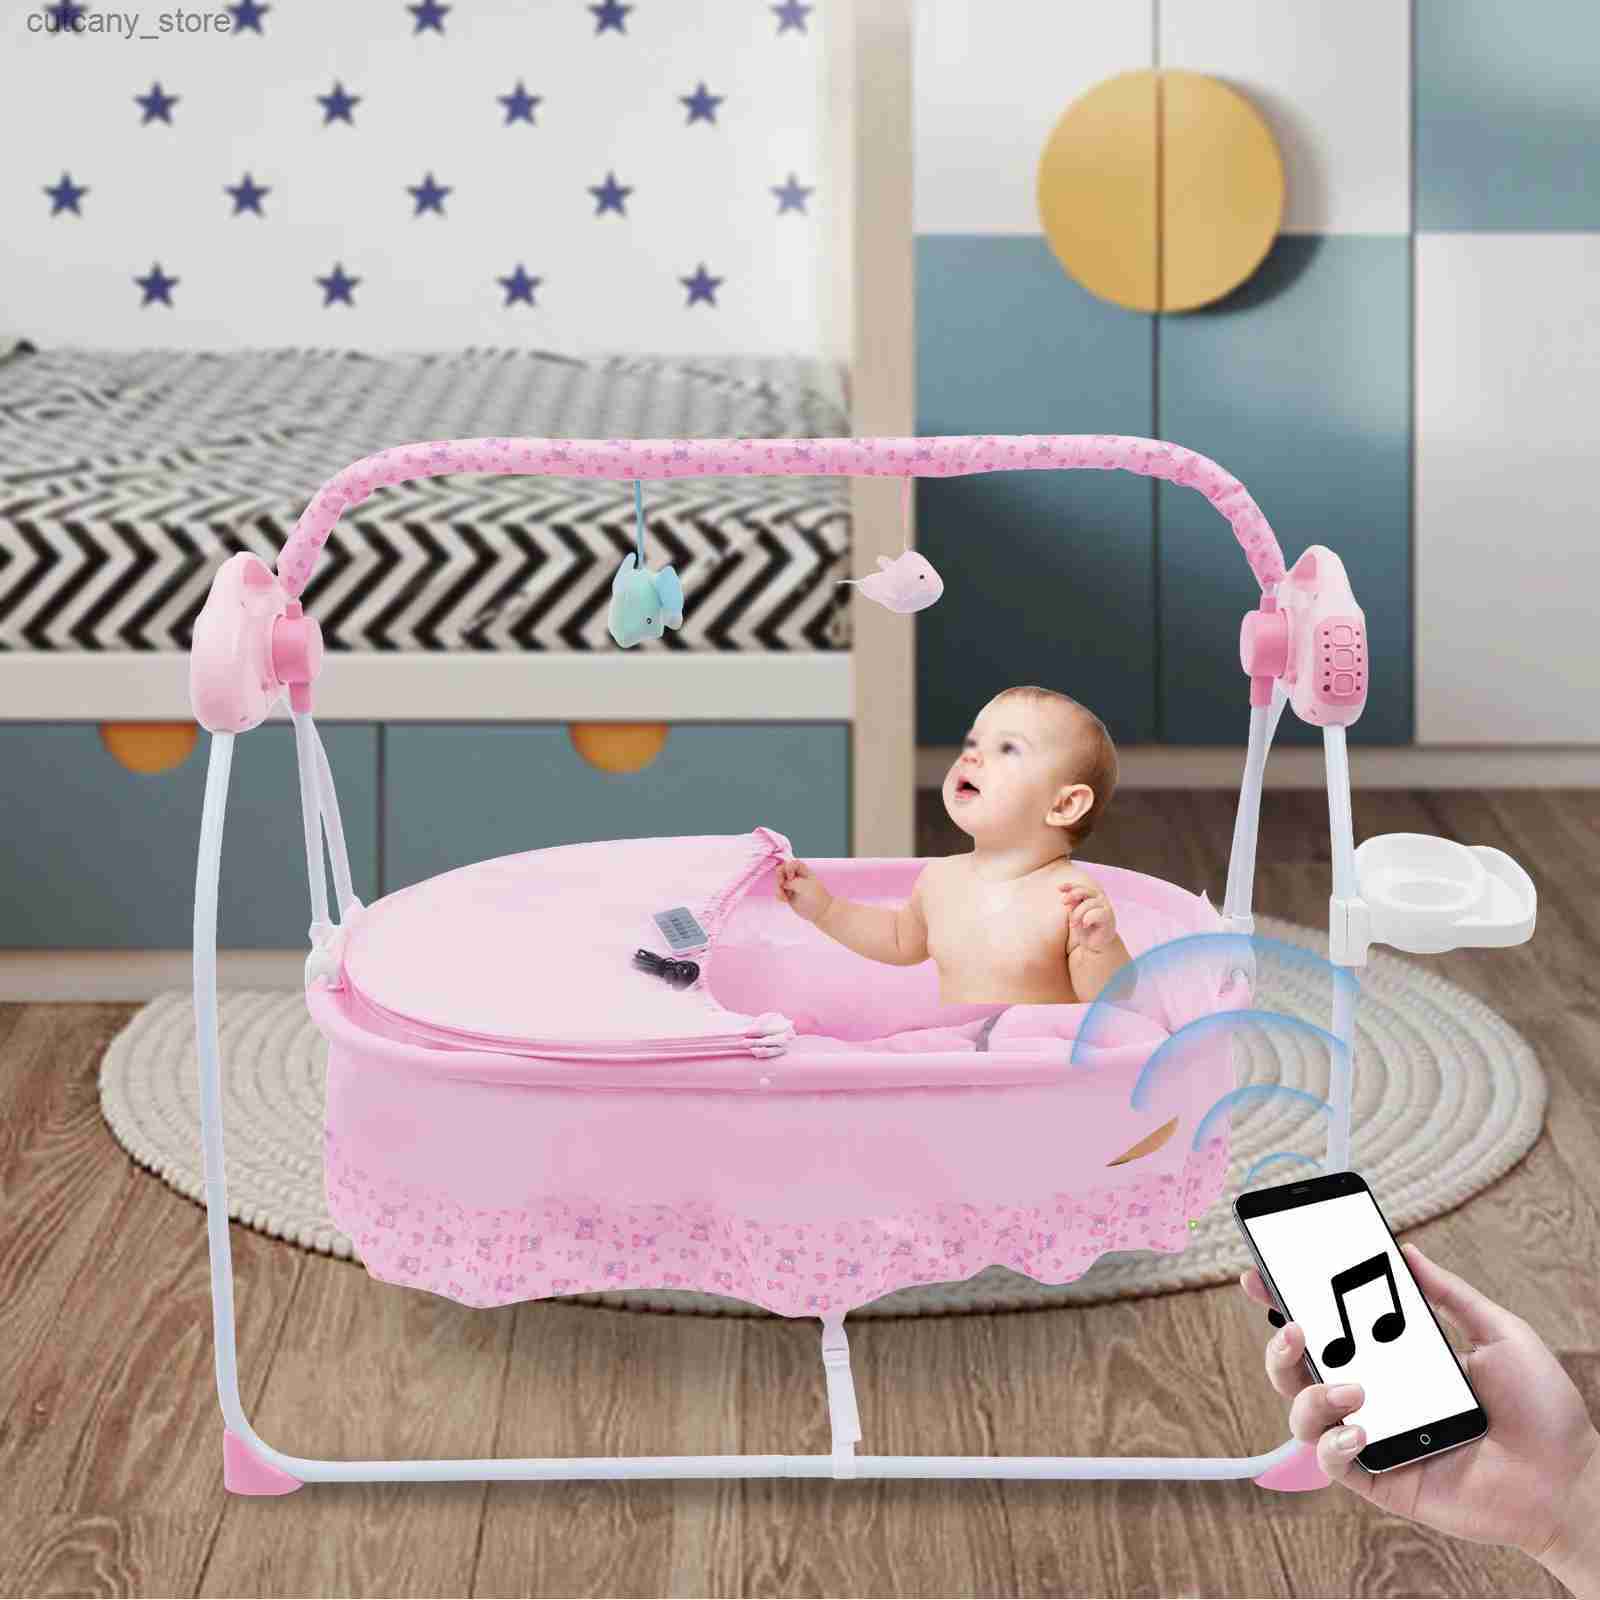 Baby Cribs Ectric Bluetooth Baby Crad Swing Portab Crib Infant Bed Bassinet Rocking With Music Soothing Artifact Bassinet L240320